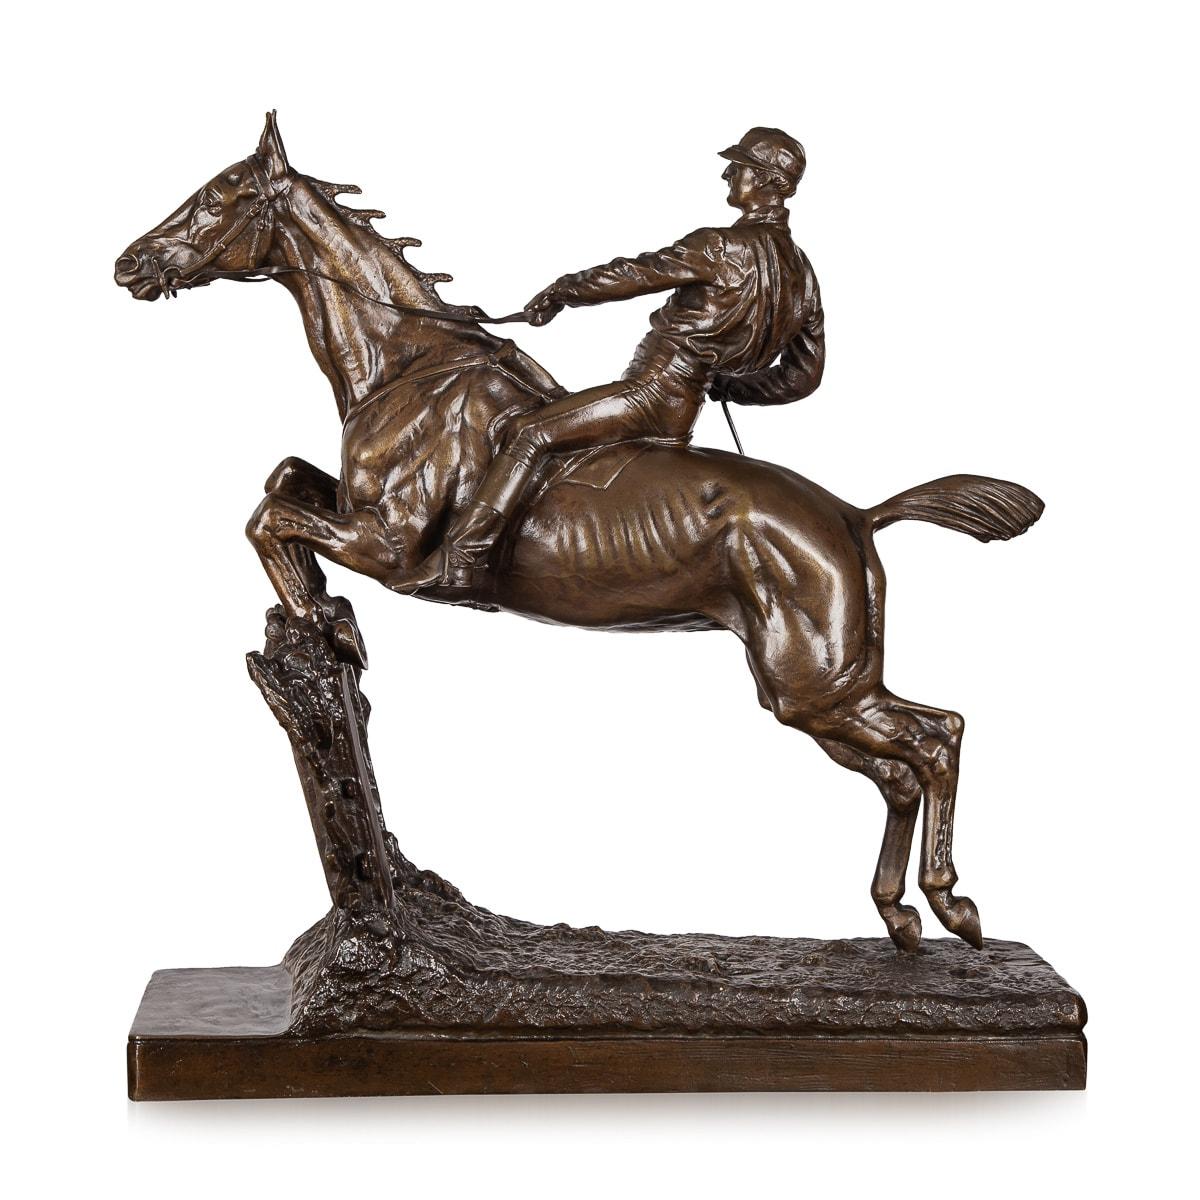 Antique early 20th Century French bronze of of a jockey and horse jumping a fence. The bronze is unsigned.

CONDITION
In great condition - no damage.

SIZE
height: 42cm
width: 39cm
depth: 15cm